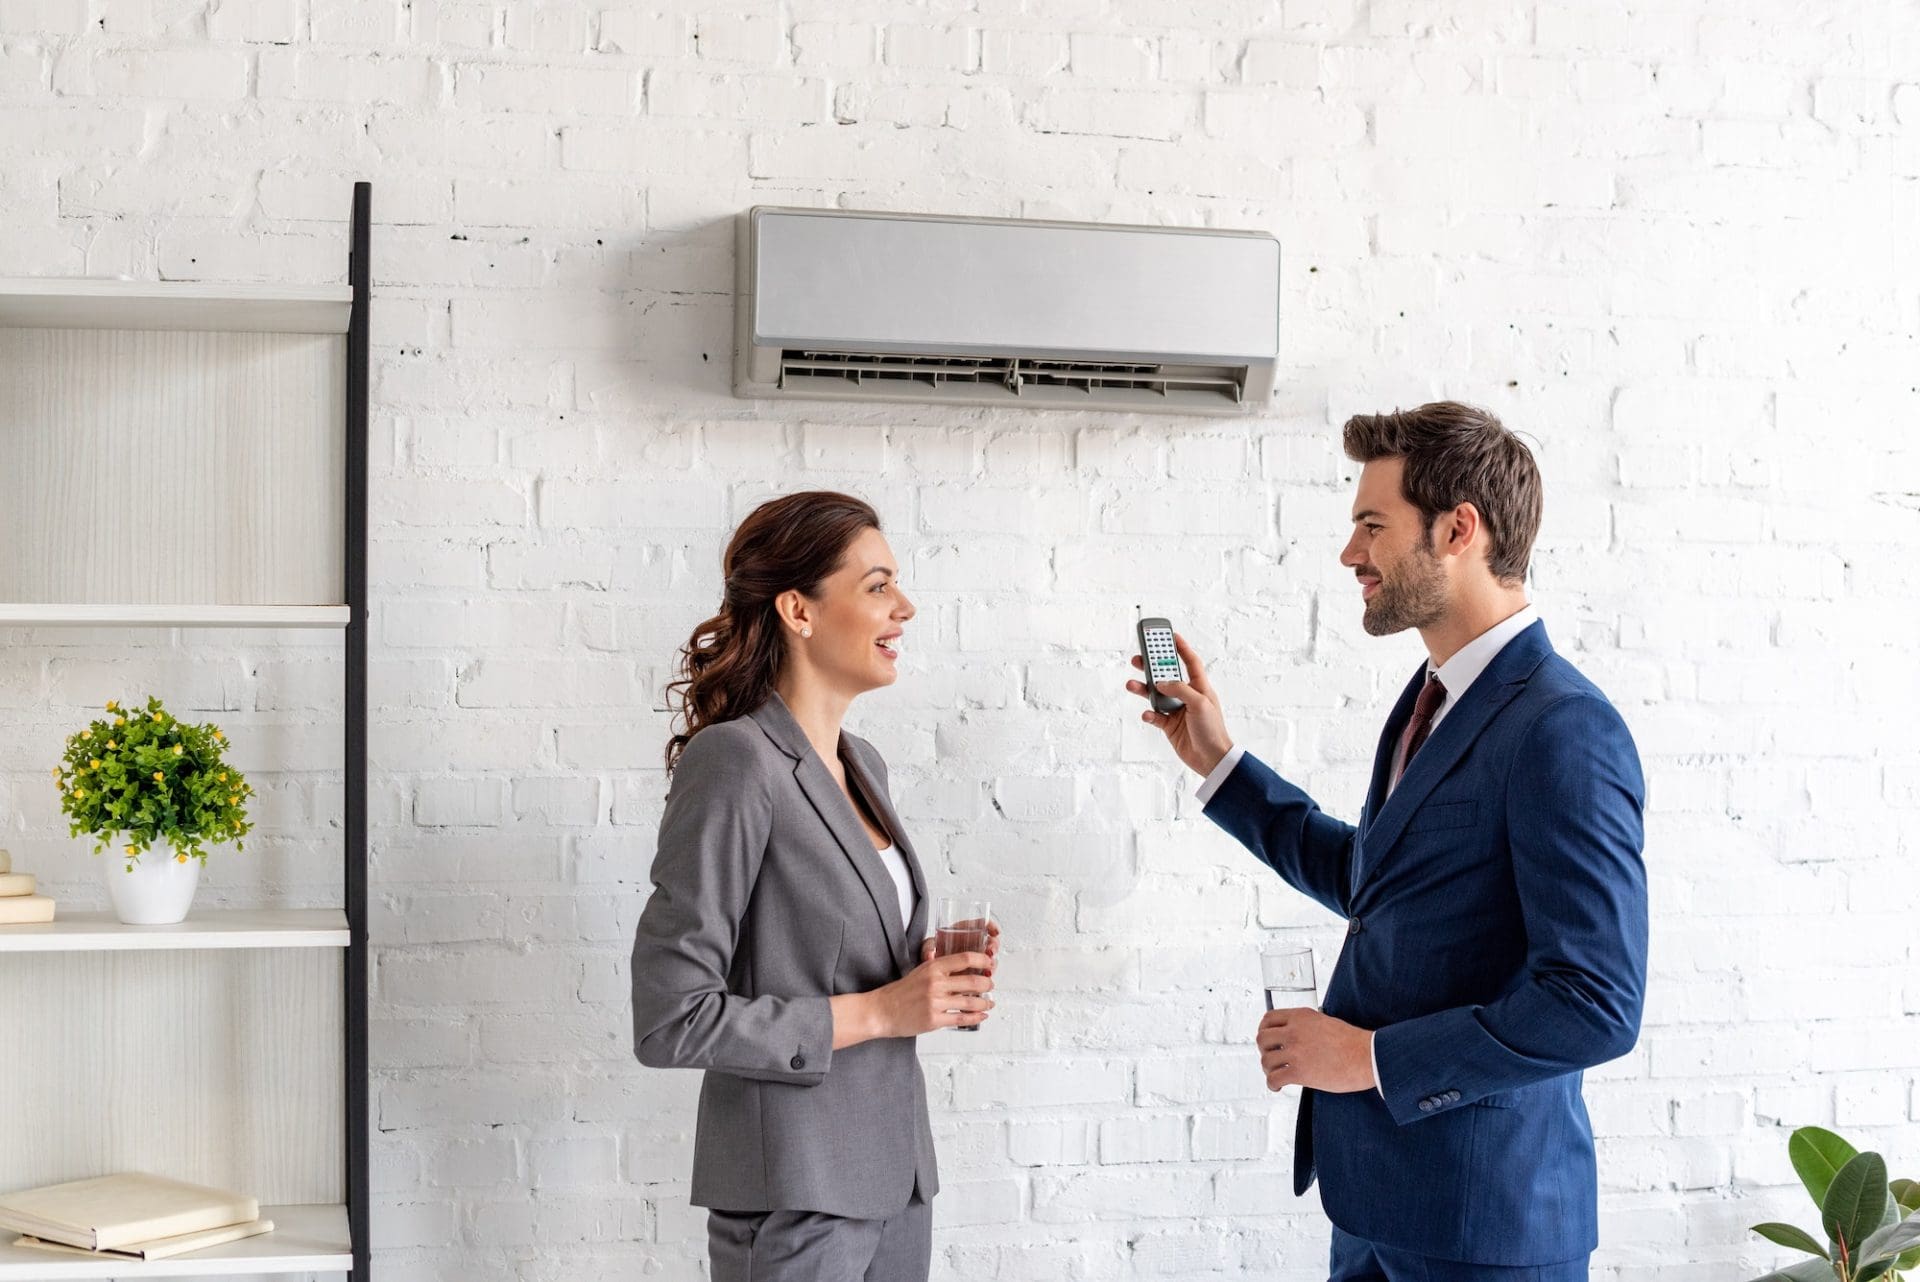 smiling businesspeople talking while standing under air conditioner in office